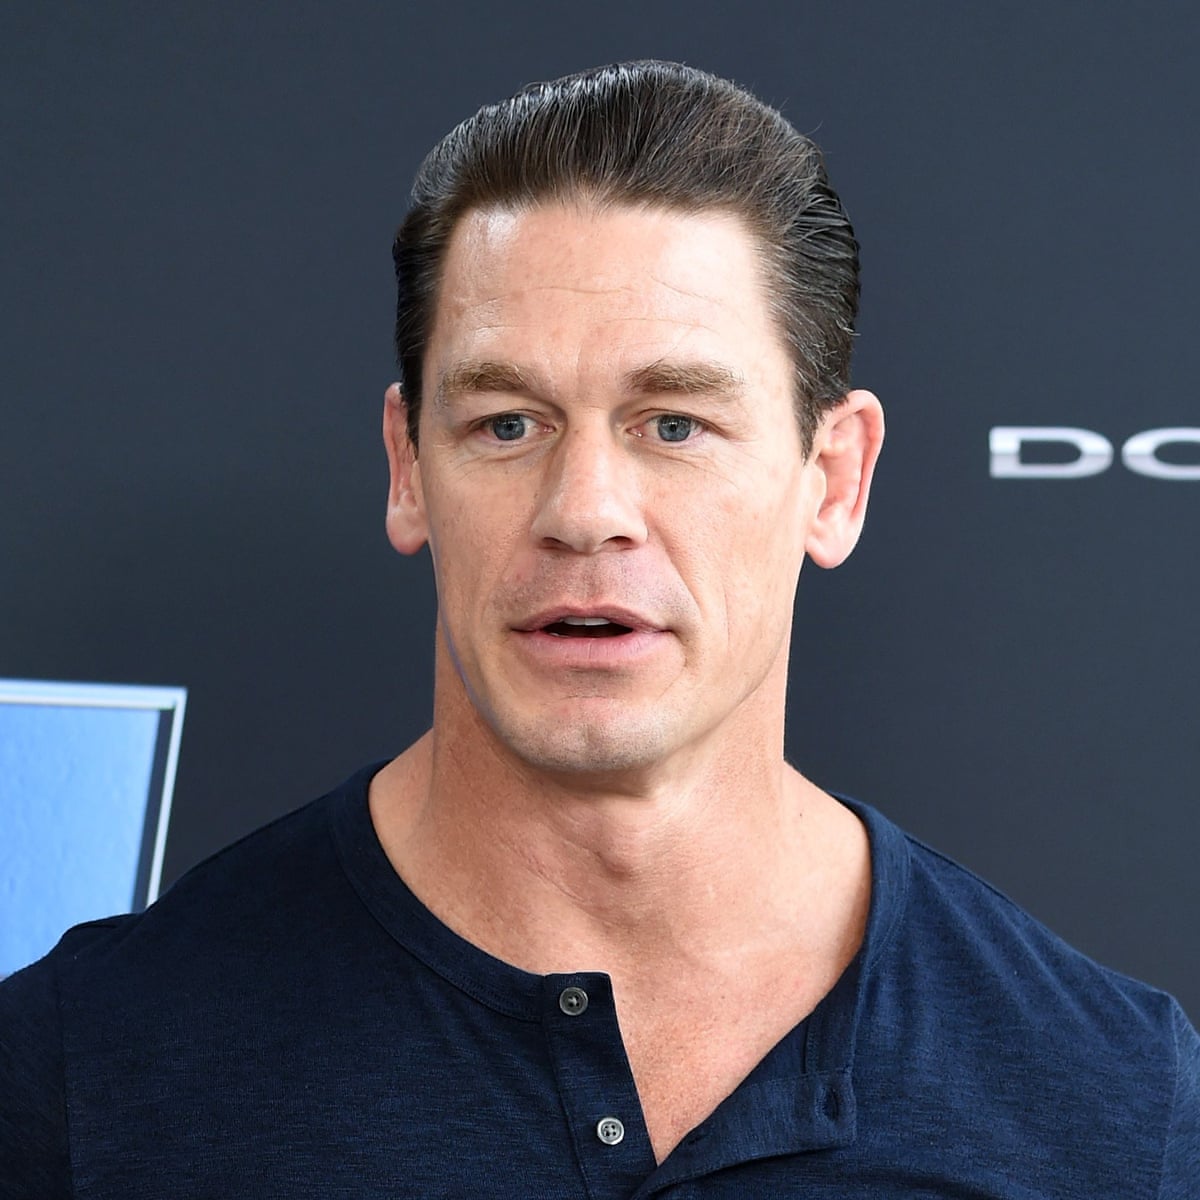 John Cena 'very sorry' for saying Taiwan is a country | China ...